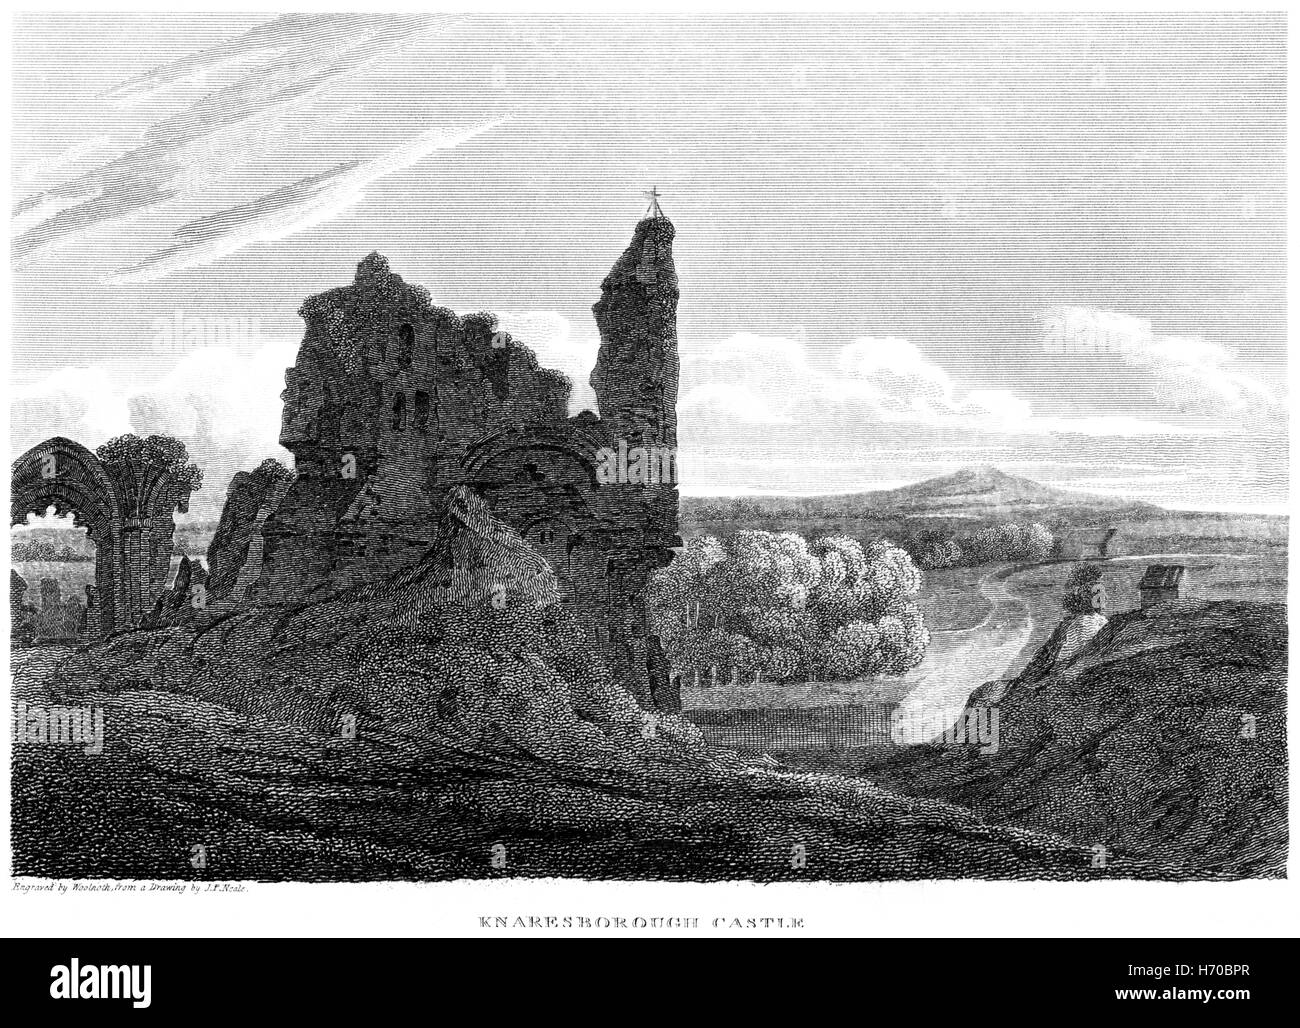 An engraving of Knaresborough Castle, Yorkshire scanned at high resolution from a book printed in 1812. Believed copyright free. Stock Photo